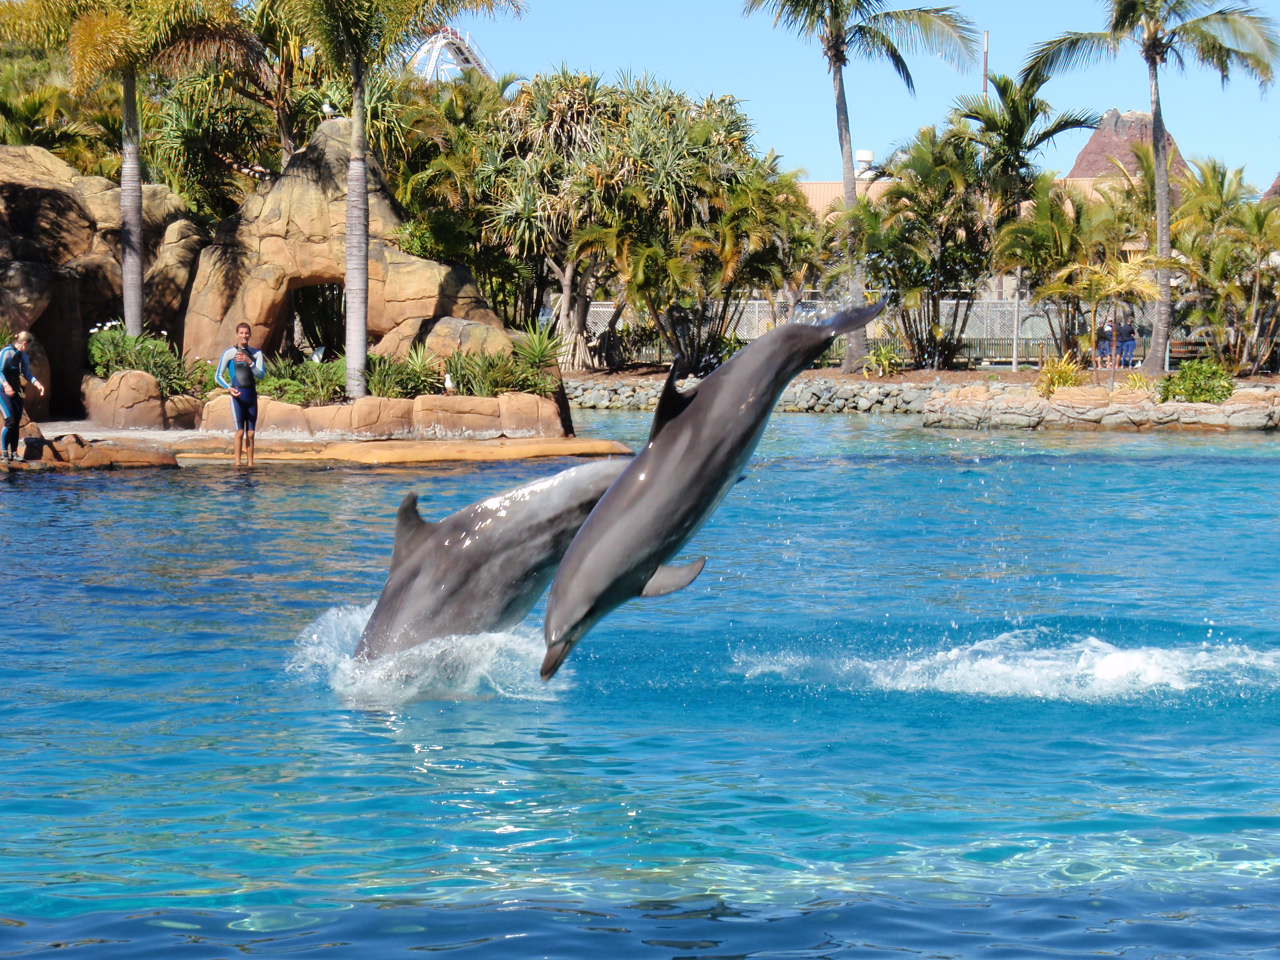 Dolphins photo